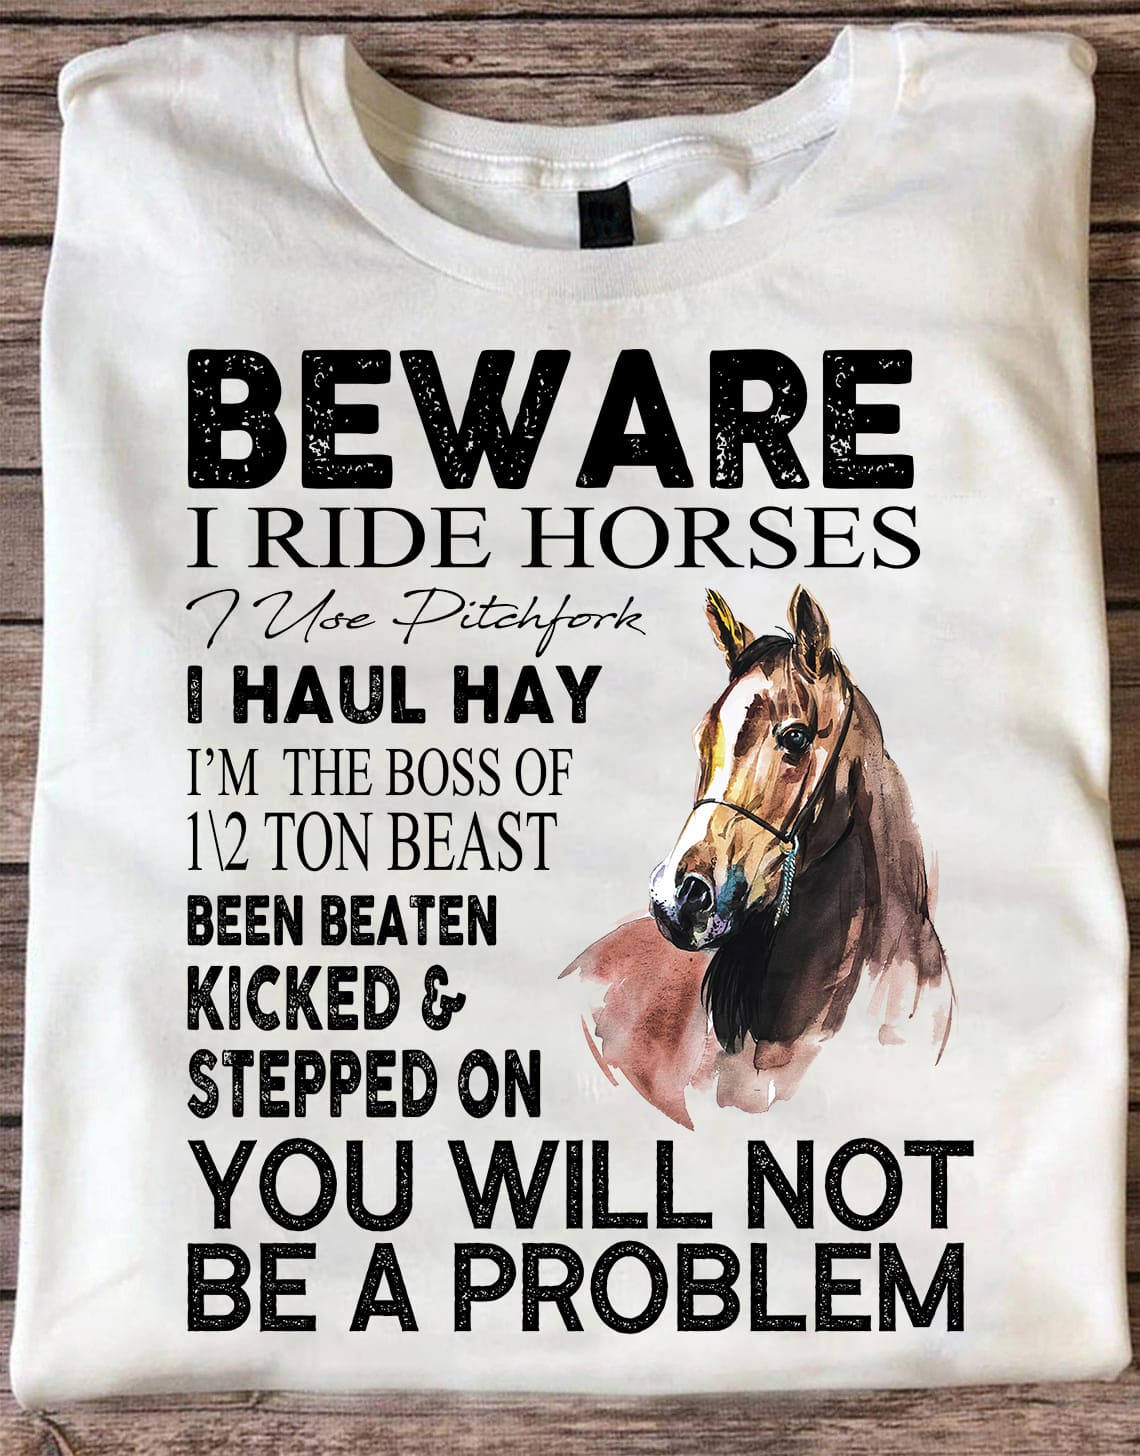 Beware I ride hoes I use pitchfork, been beaten kicked - Gift for horse lover